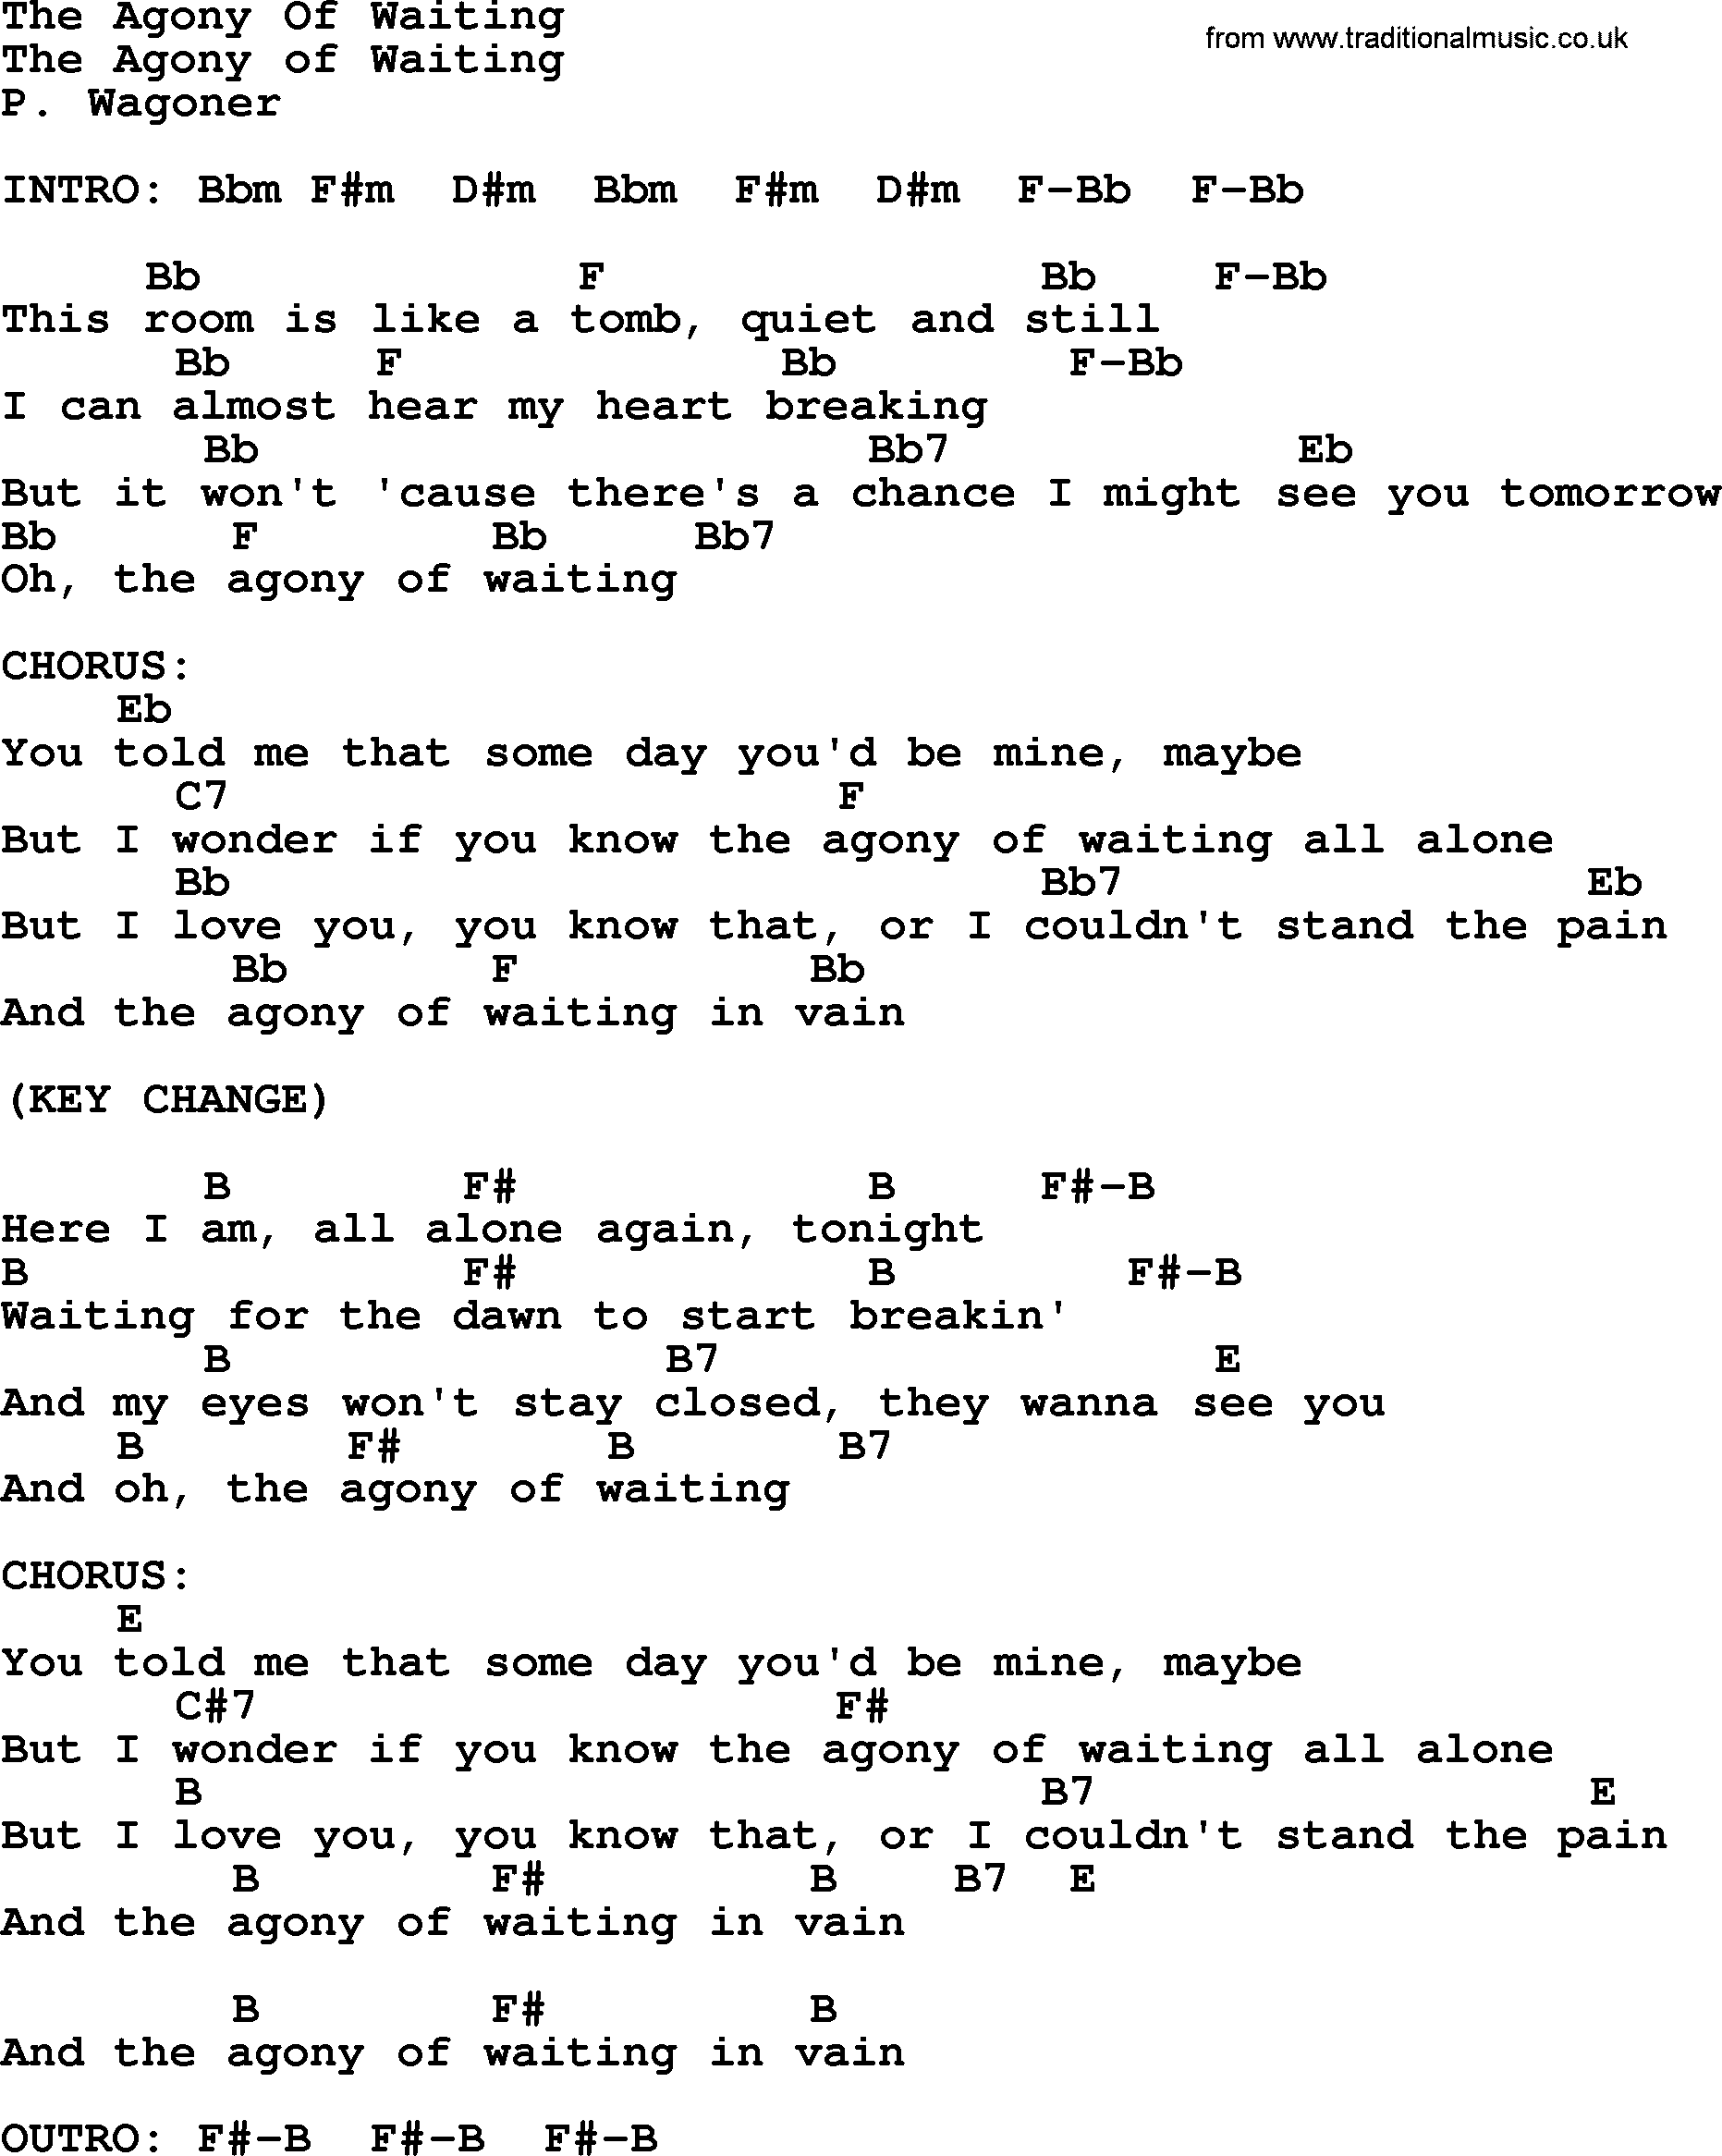 Bluegrass song: The Agony Of Waiting, lyrics and chords